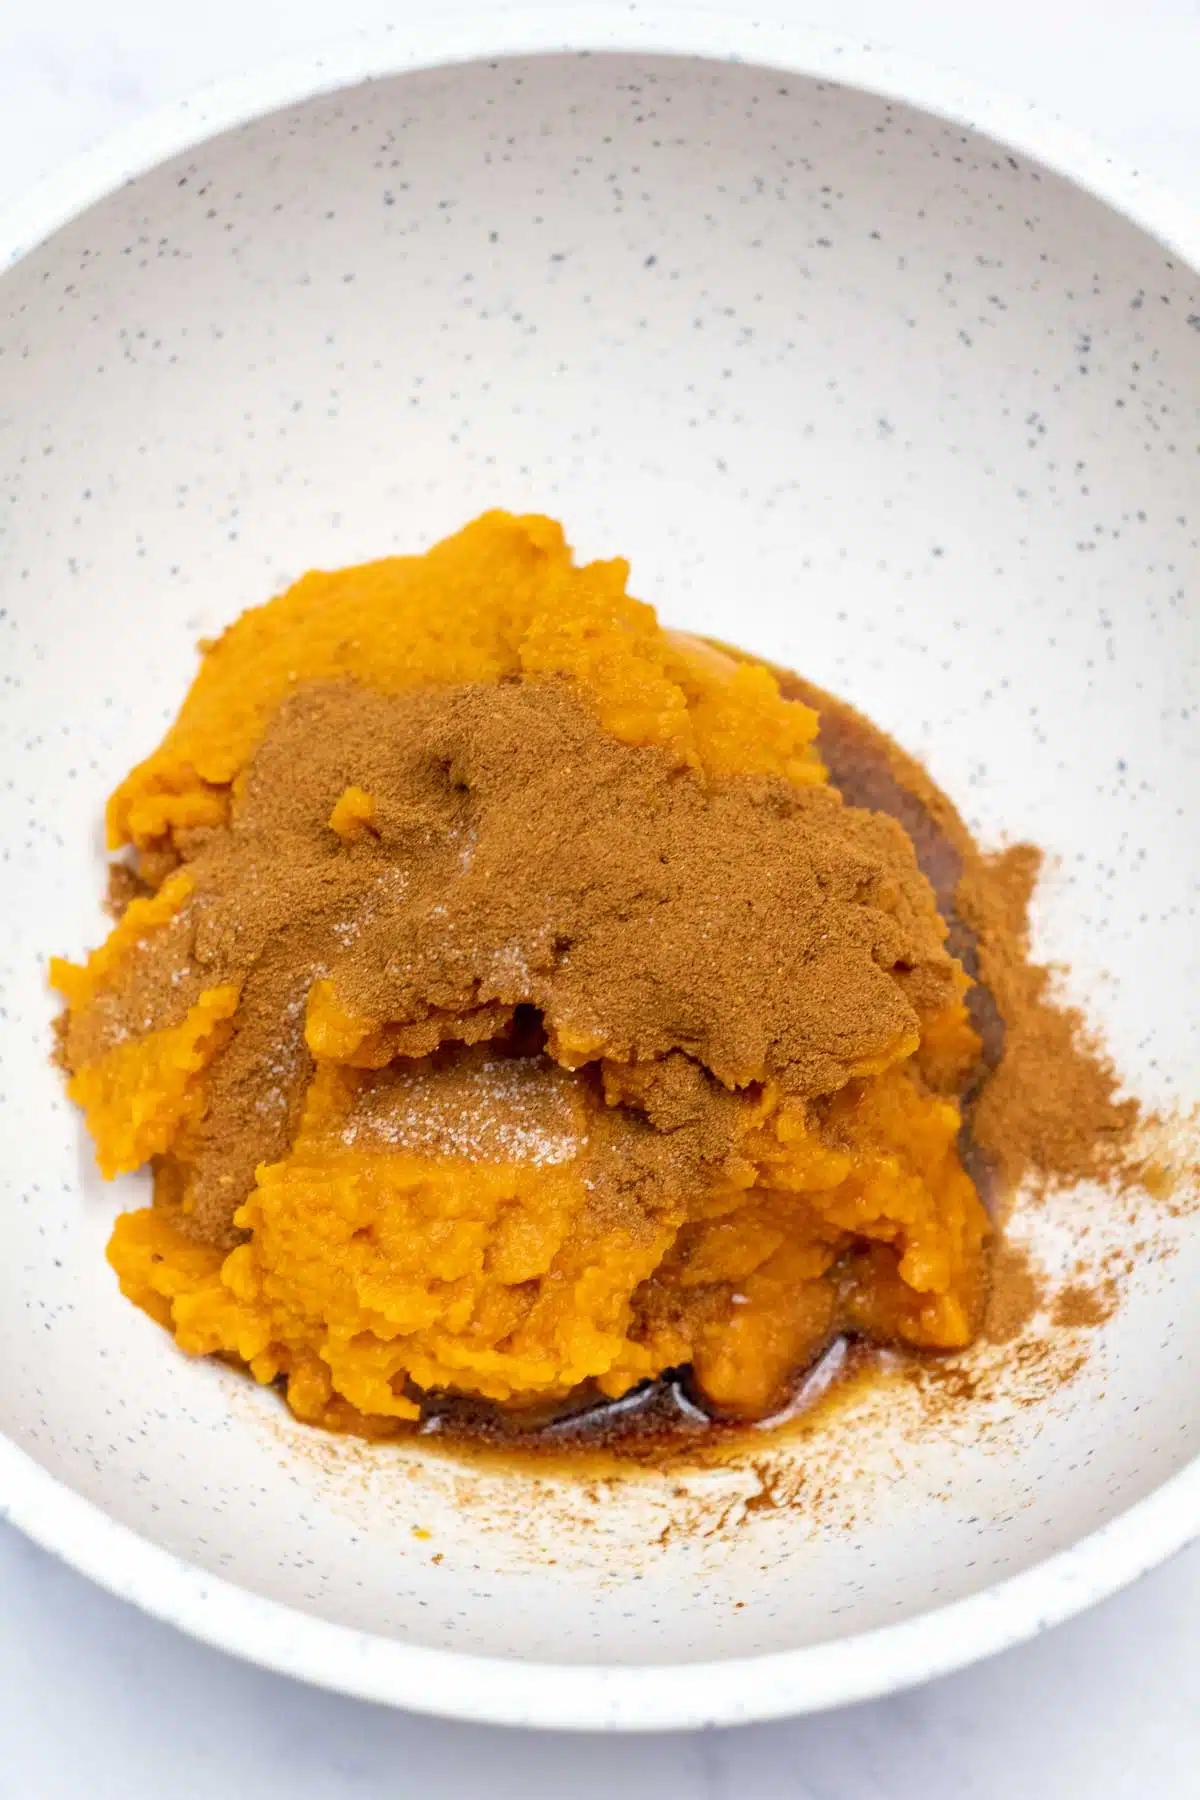 Process image 1 showing pumpkin puree and spices in a mixing bowl.